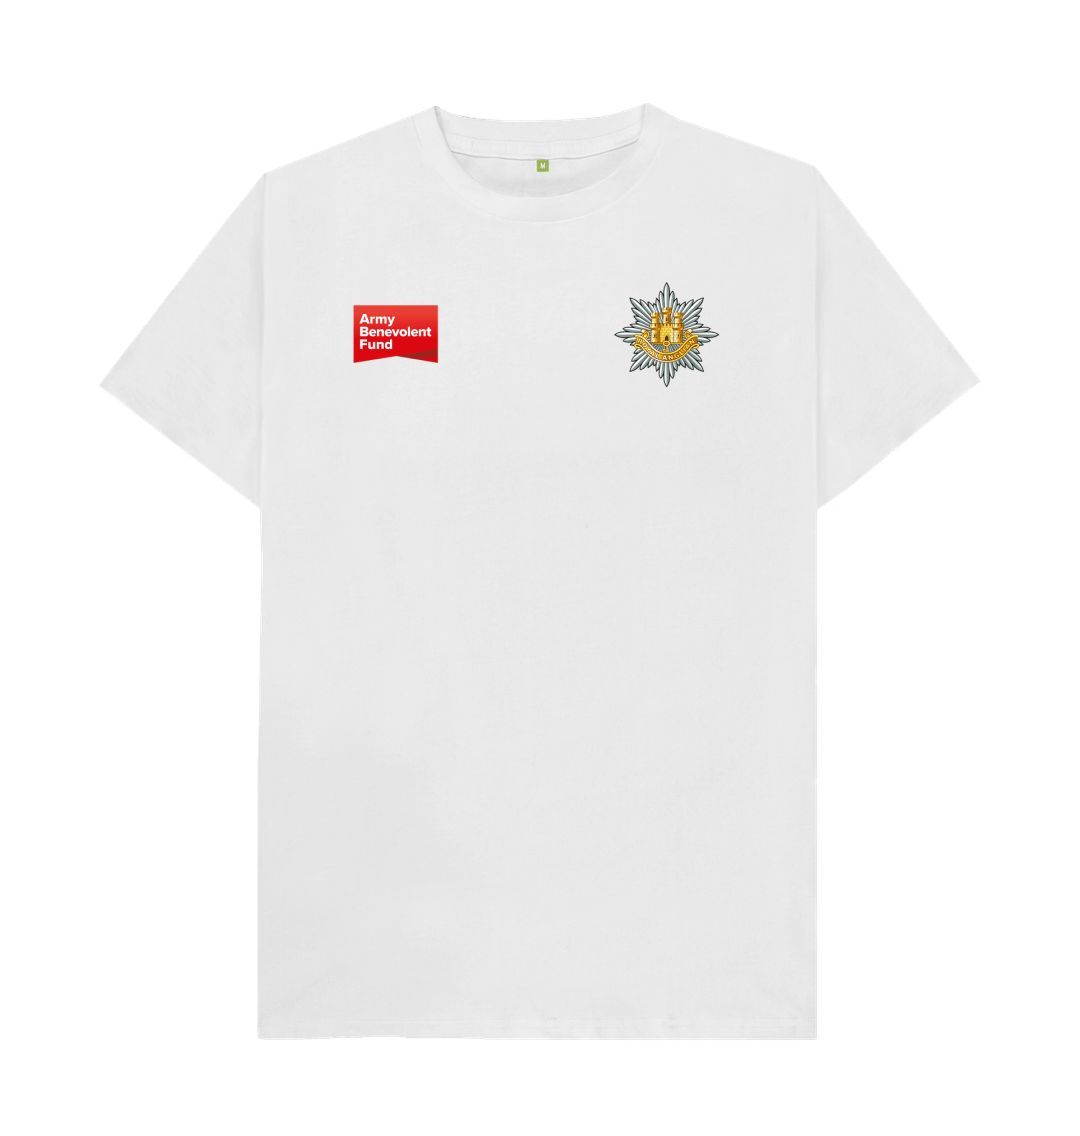 The Royal Anglian Regiment Unisex T-shirt - Army Benevolent Fund